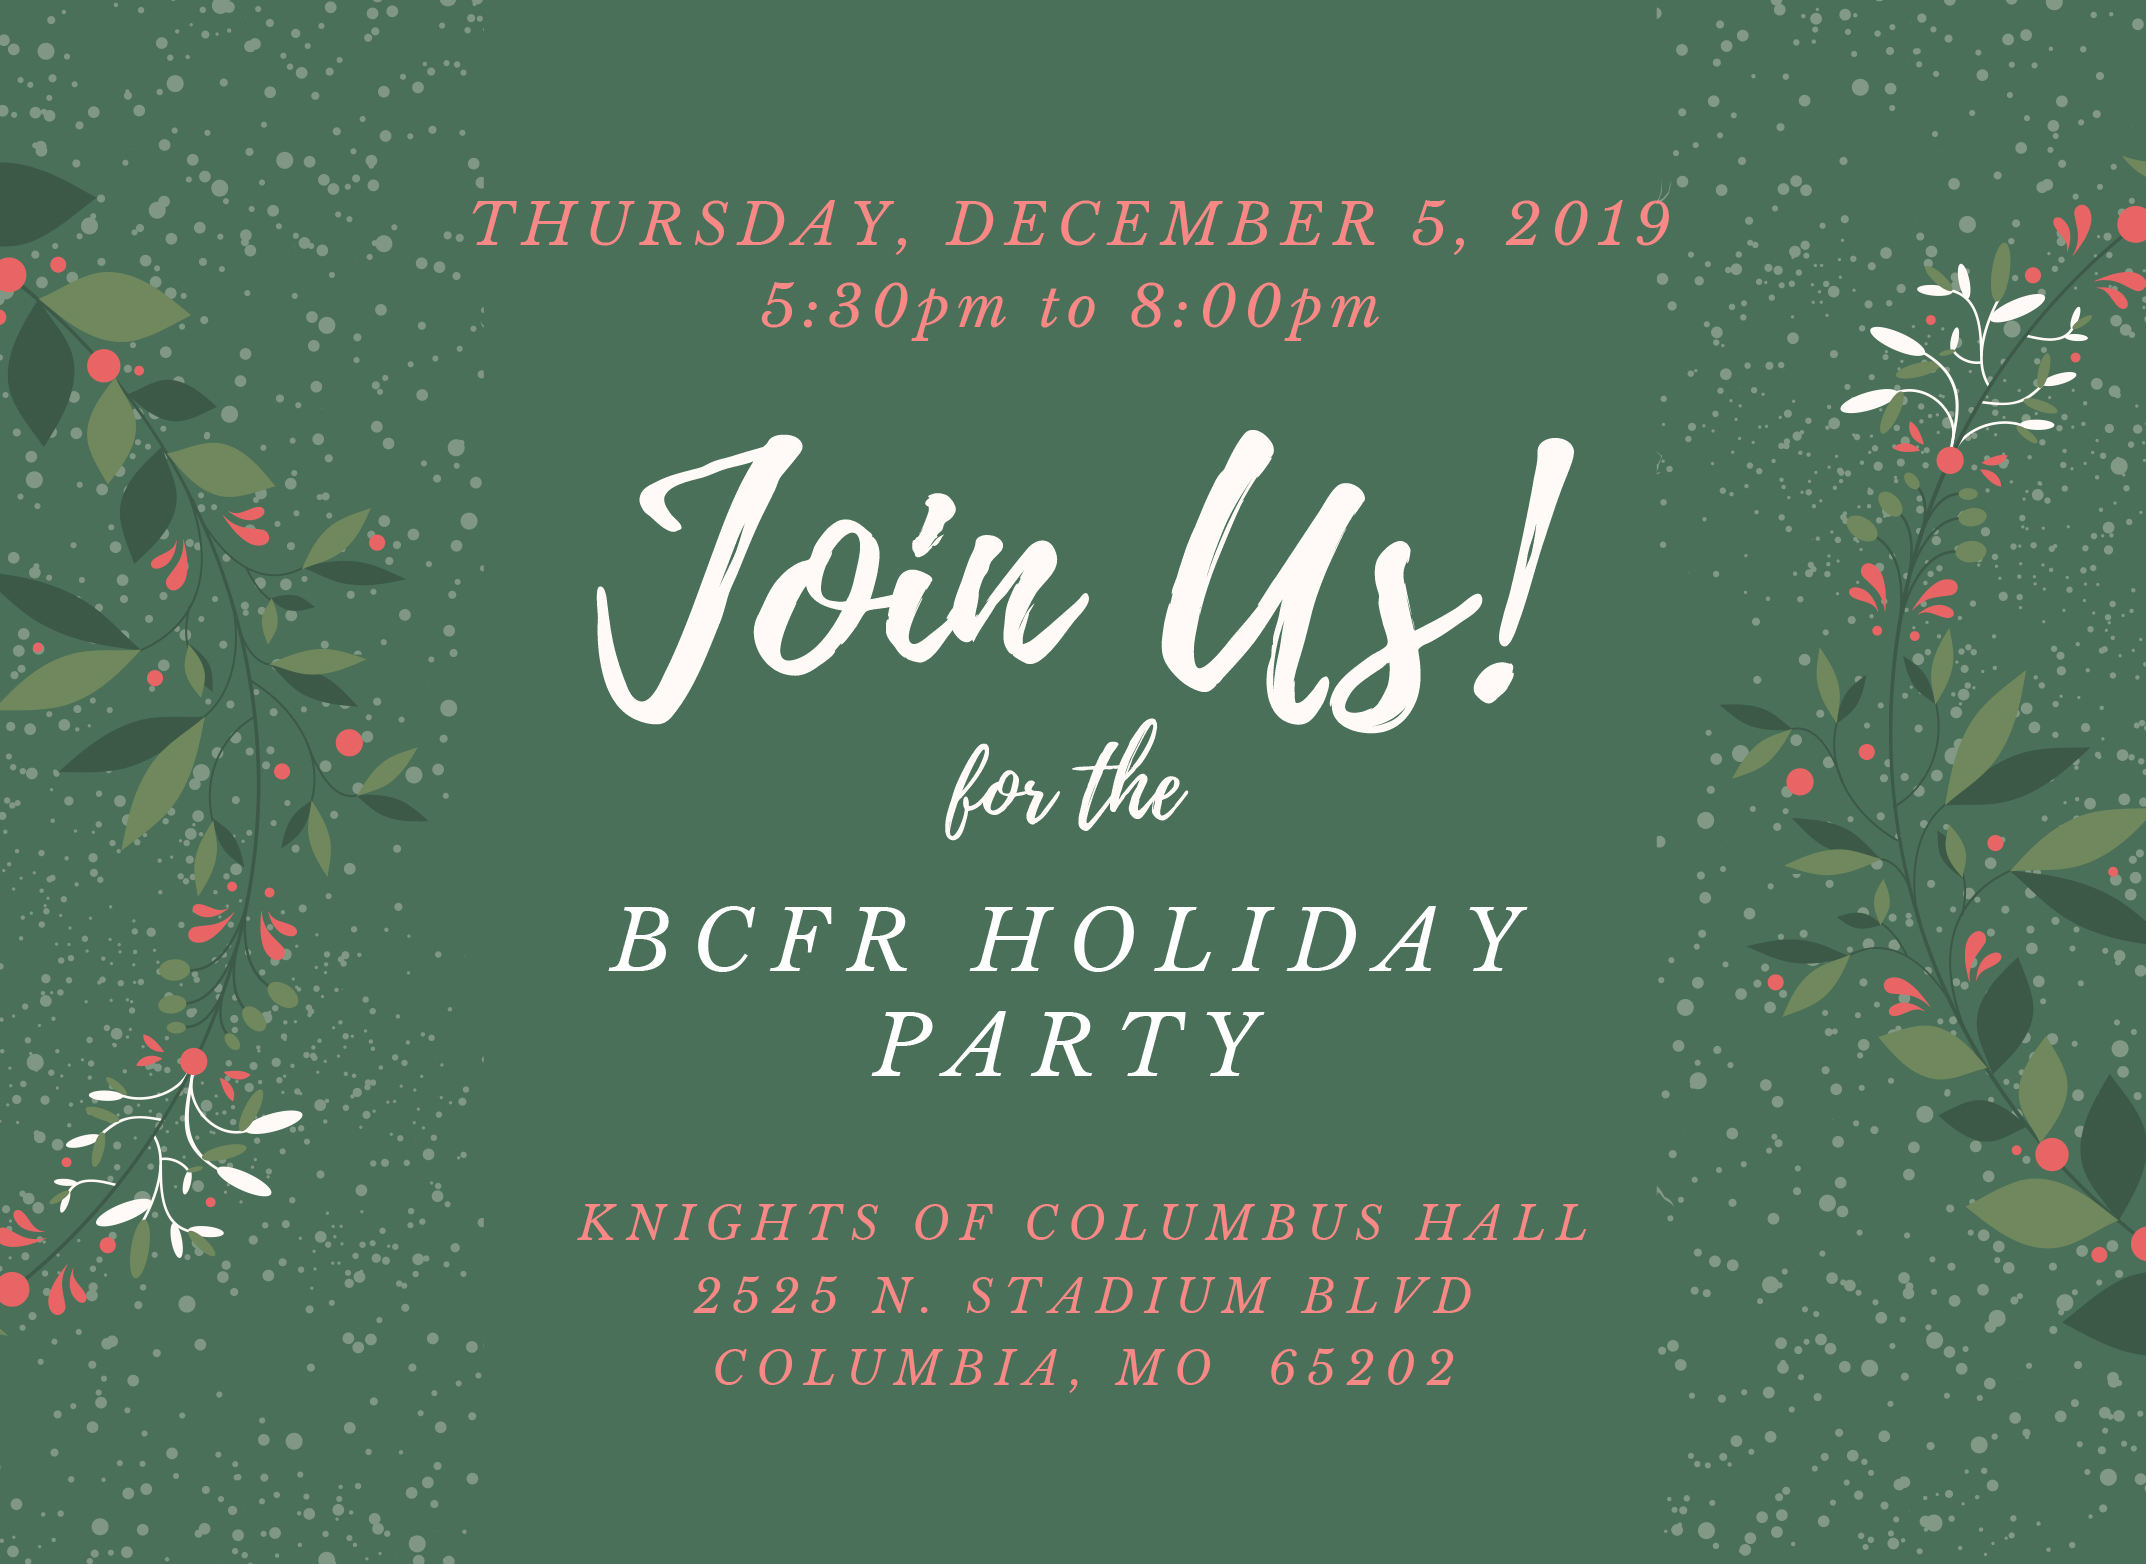 Save The Date For The Annual fr Holiday Party Boone County Family Resourcesboone County Family Resources We Help People With Developmental Disabilities Thrive Connect And Achive